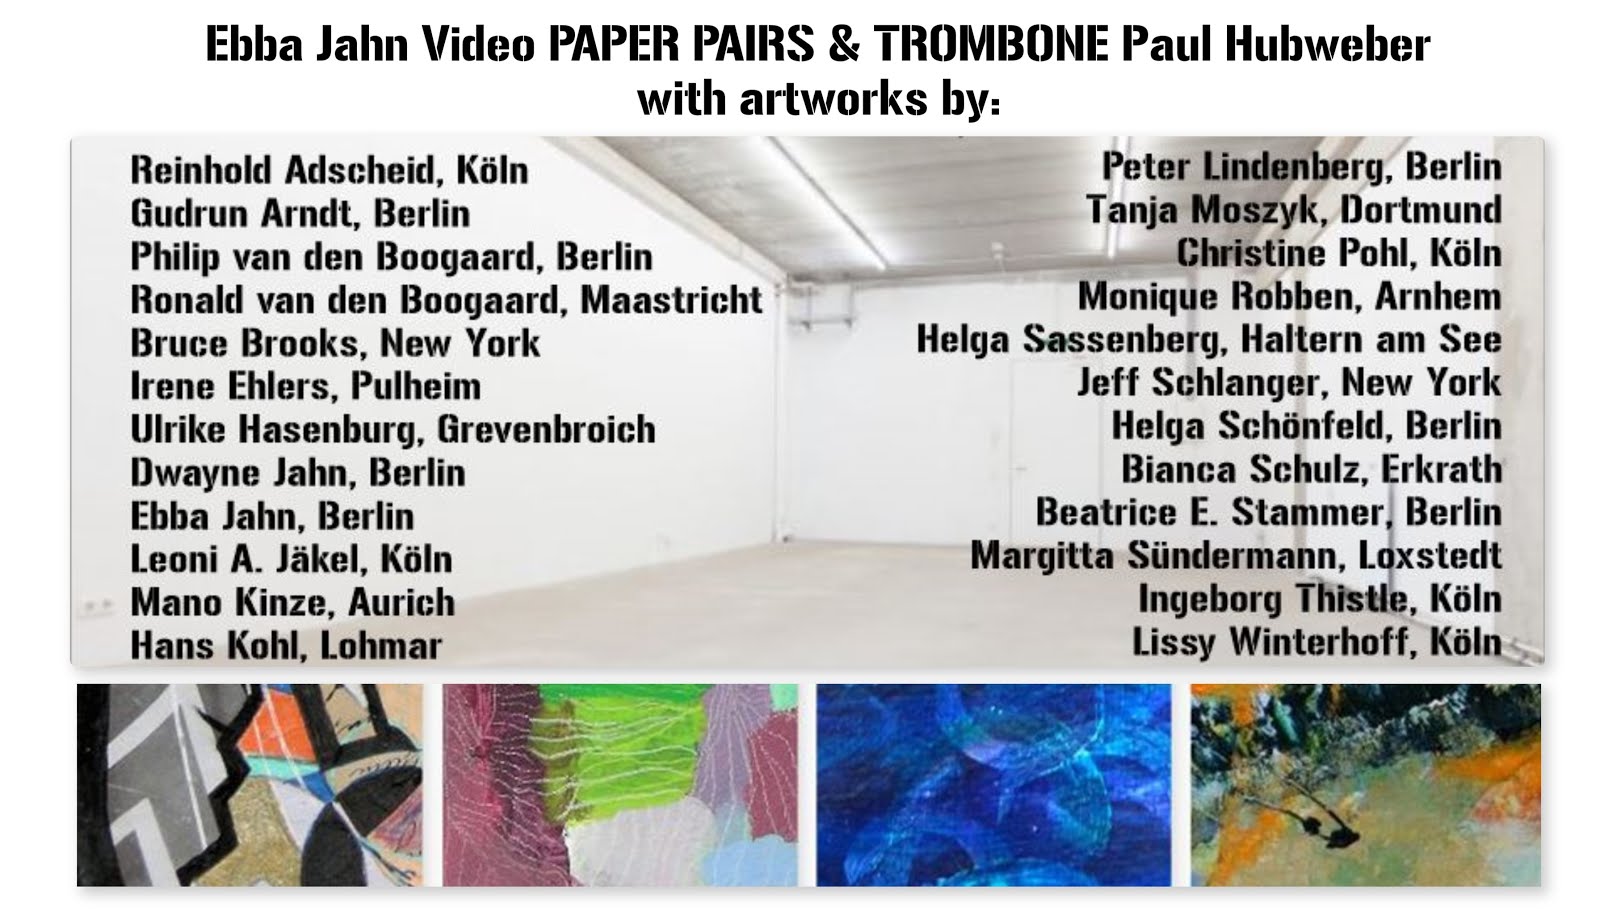 PAPER PAIRS Artworks in the Video by: